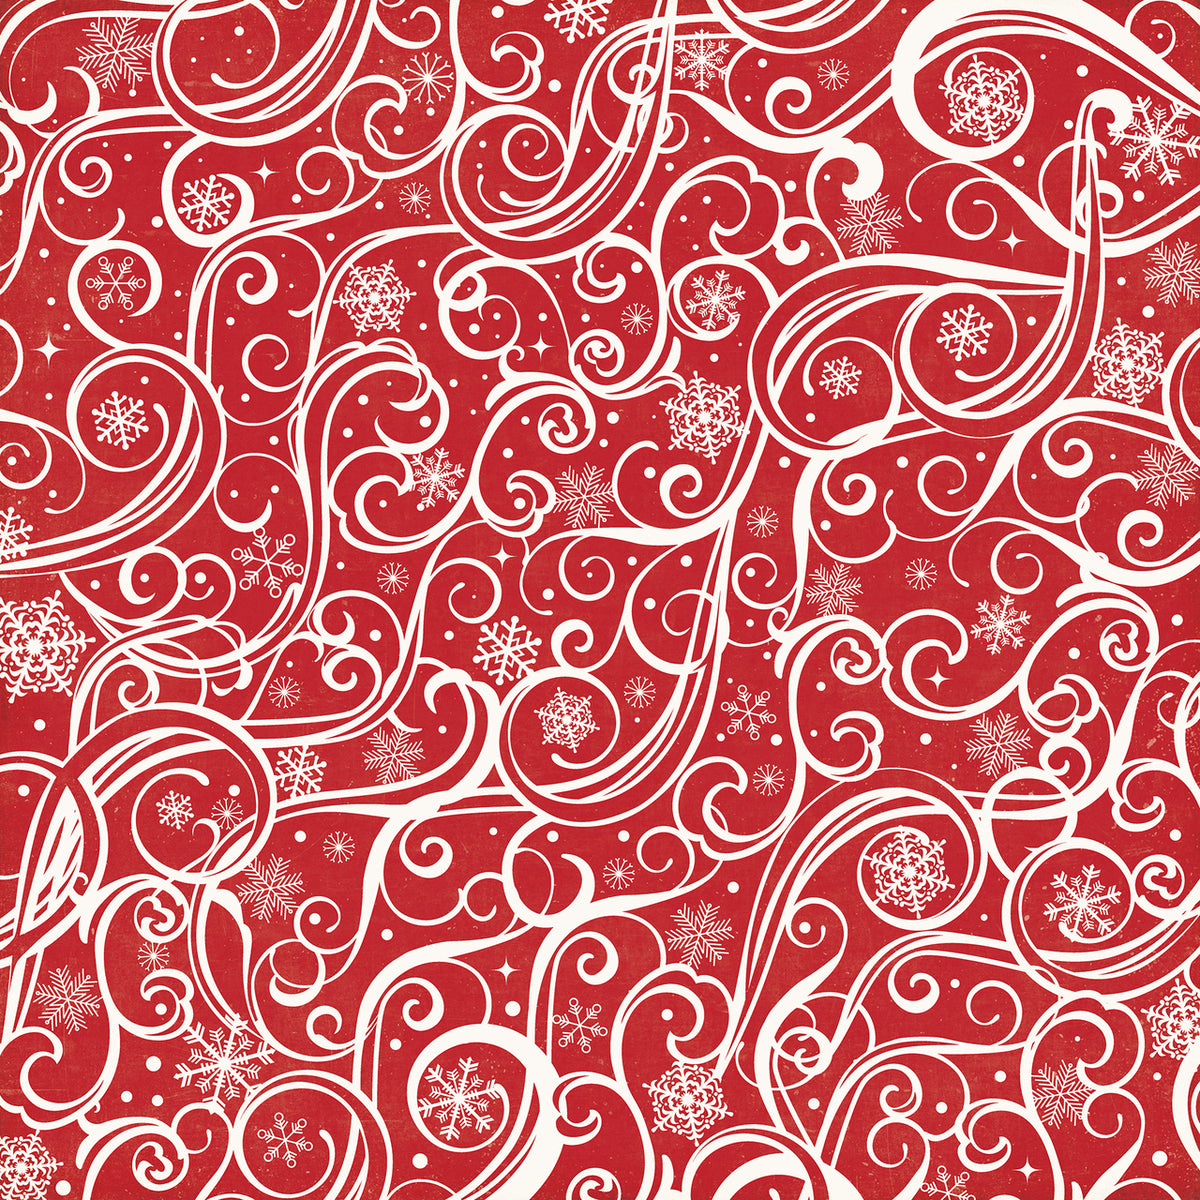 12x12 patterned paper with white scrollwork interspersed with snowflakes on red background